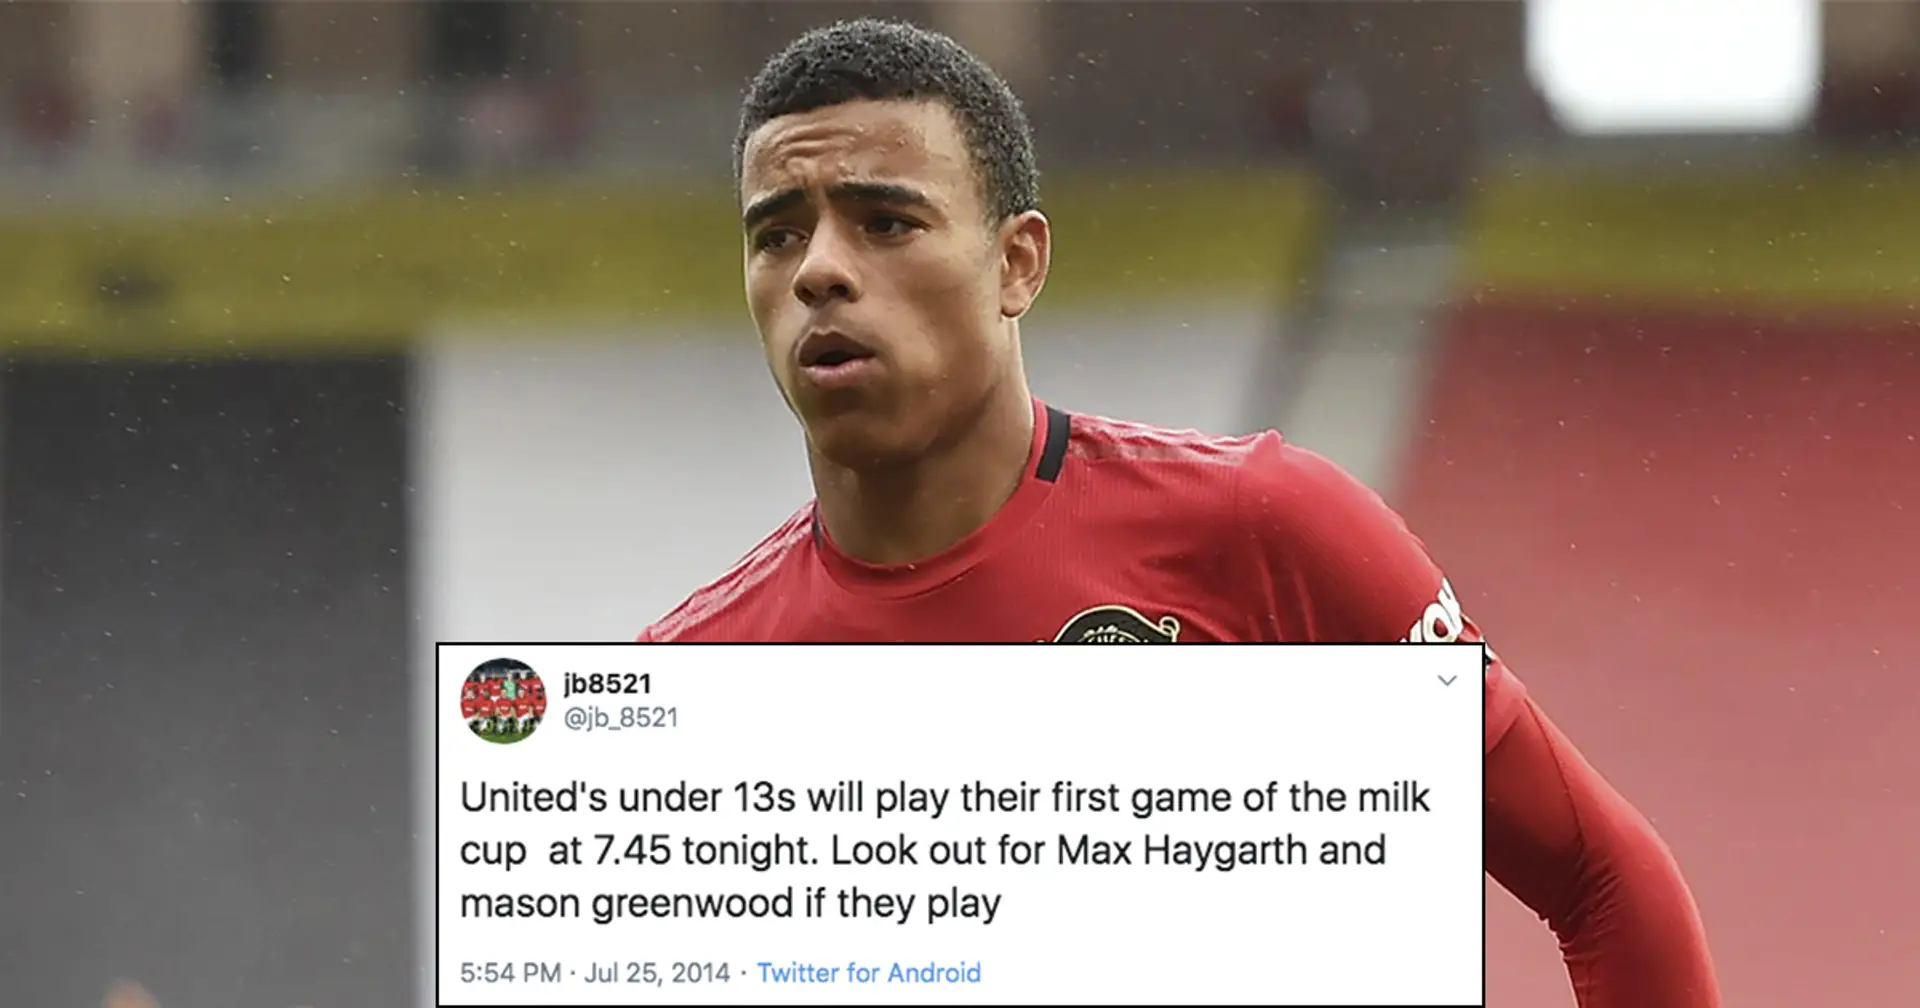 😱 United fan discovered Greenwood back in 2014 when Mason played for U13 side in Milk Cup! Check out his scouting report from back then